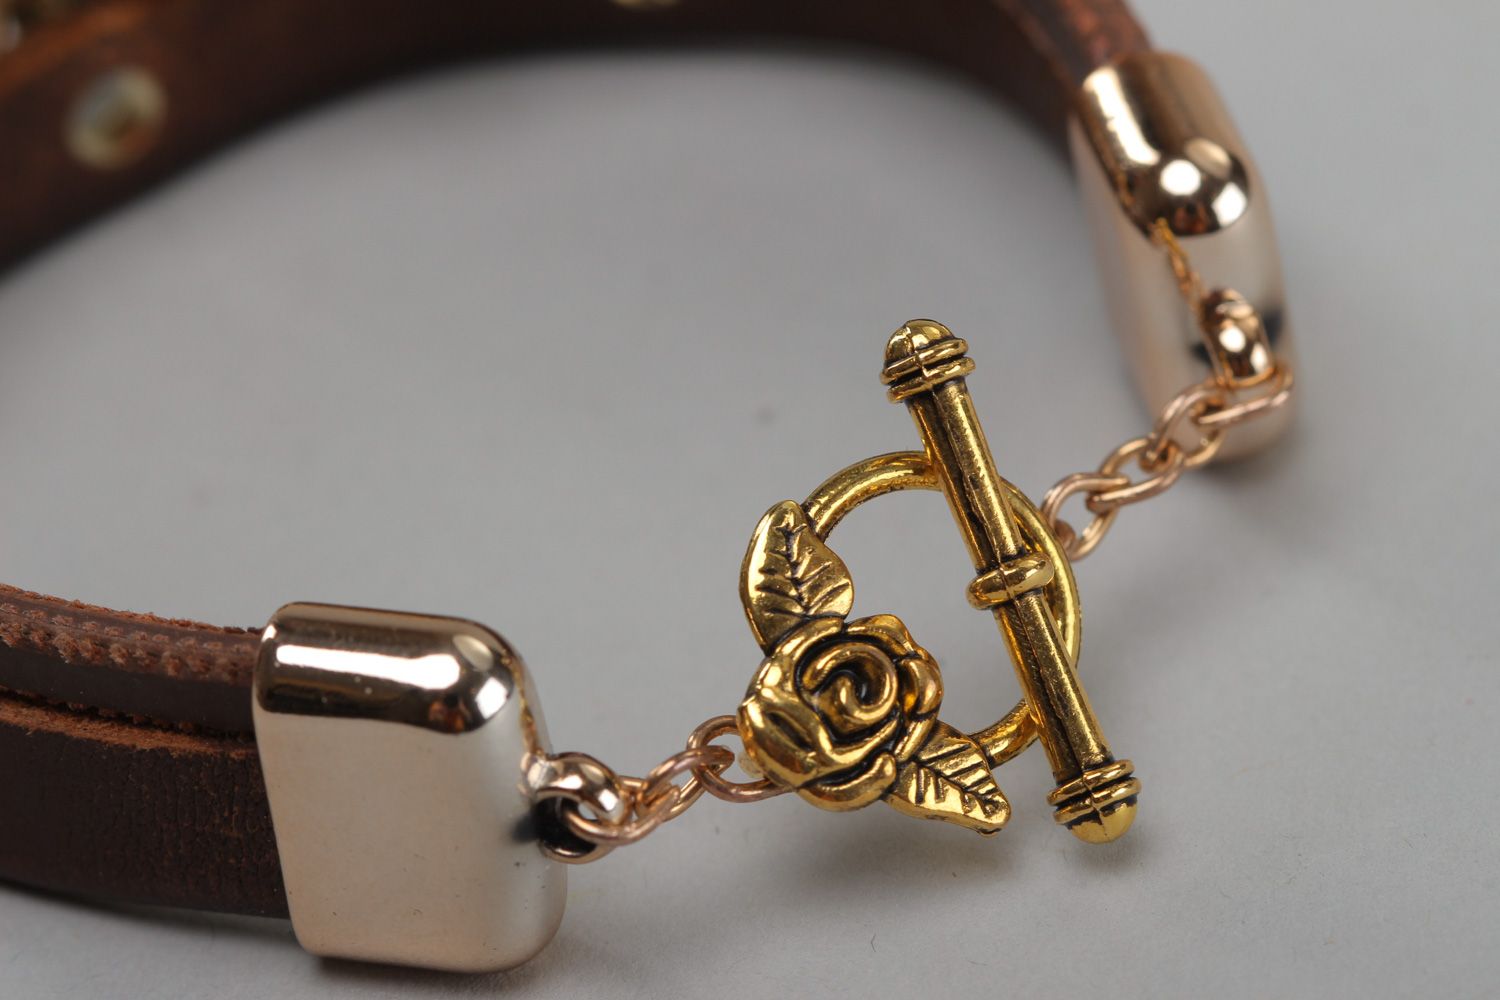 Handmade women's genuine leather bracelet with metal charm in the shape of clover photo 4